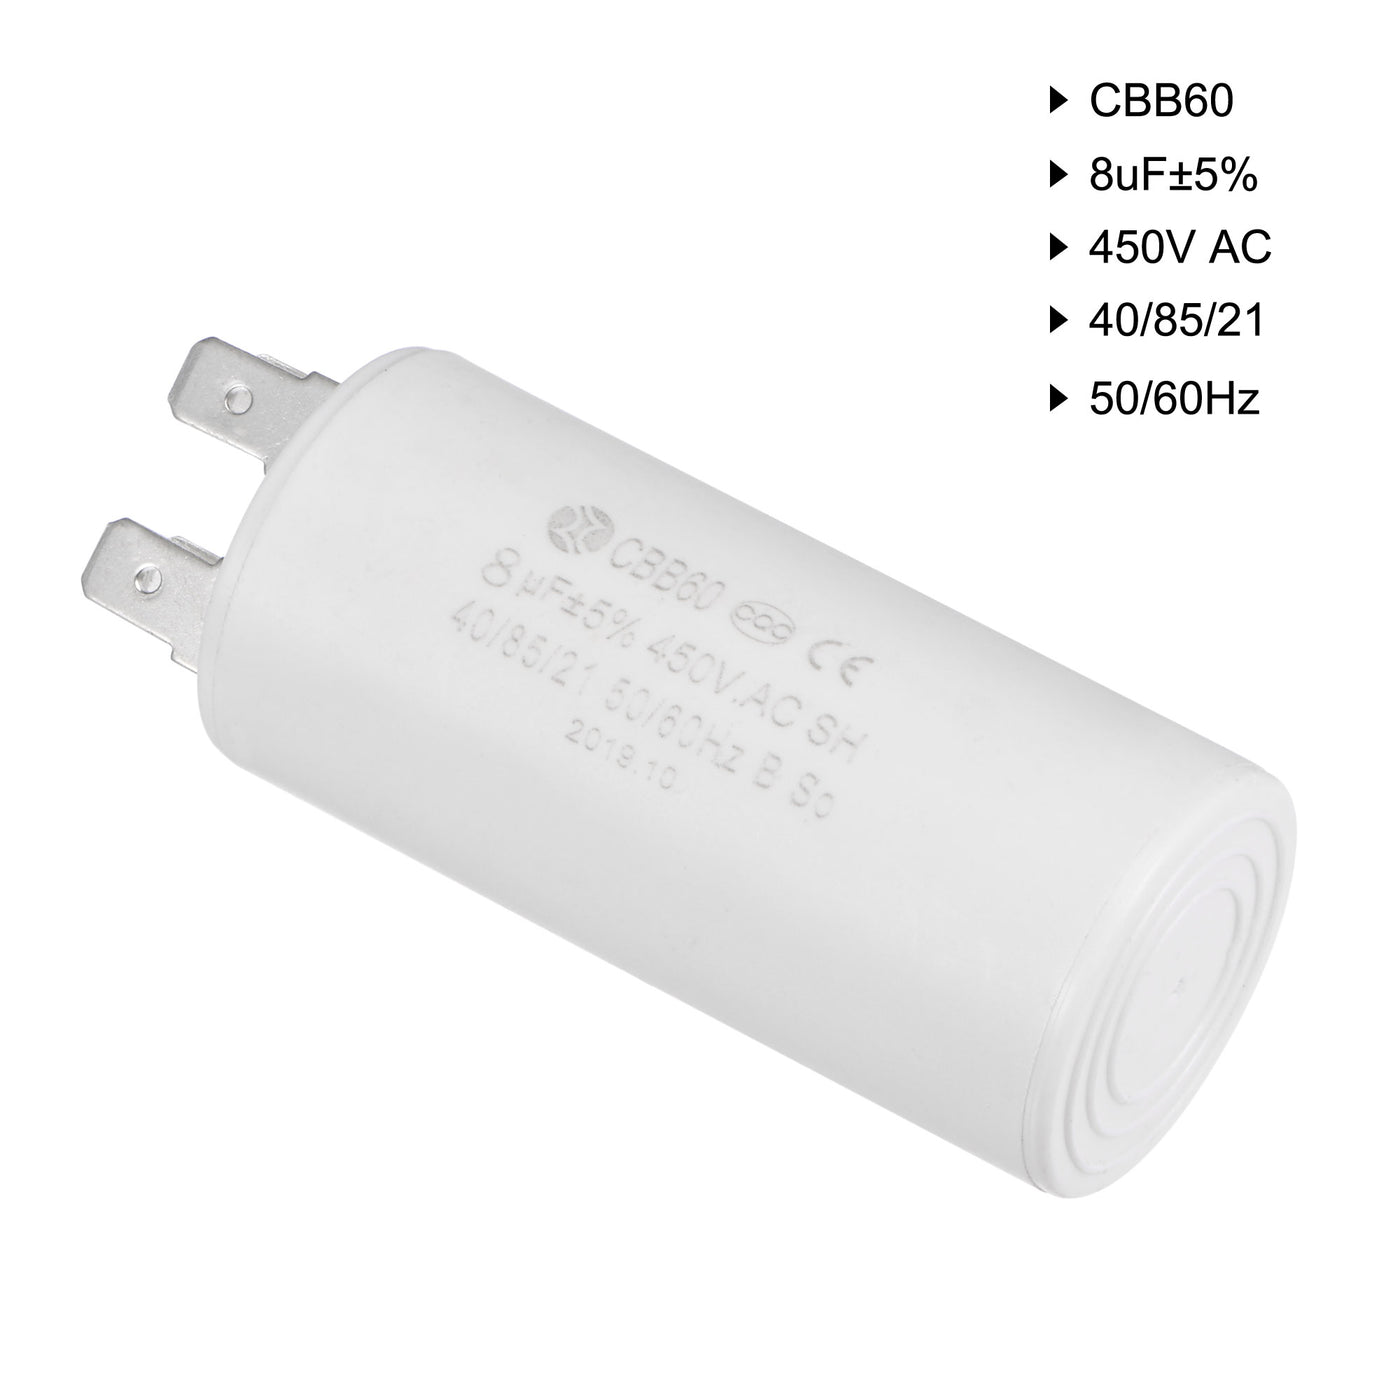 uxcell Uxcell CBB60 Run Capacitor 8uF 450V AC Double Insert 50/60Hz Cylinder 69x32mm White for Air Compressor Water Pump Motor